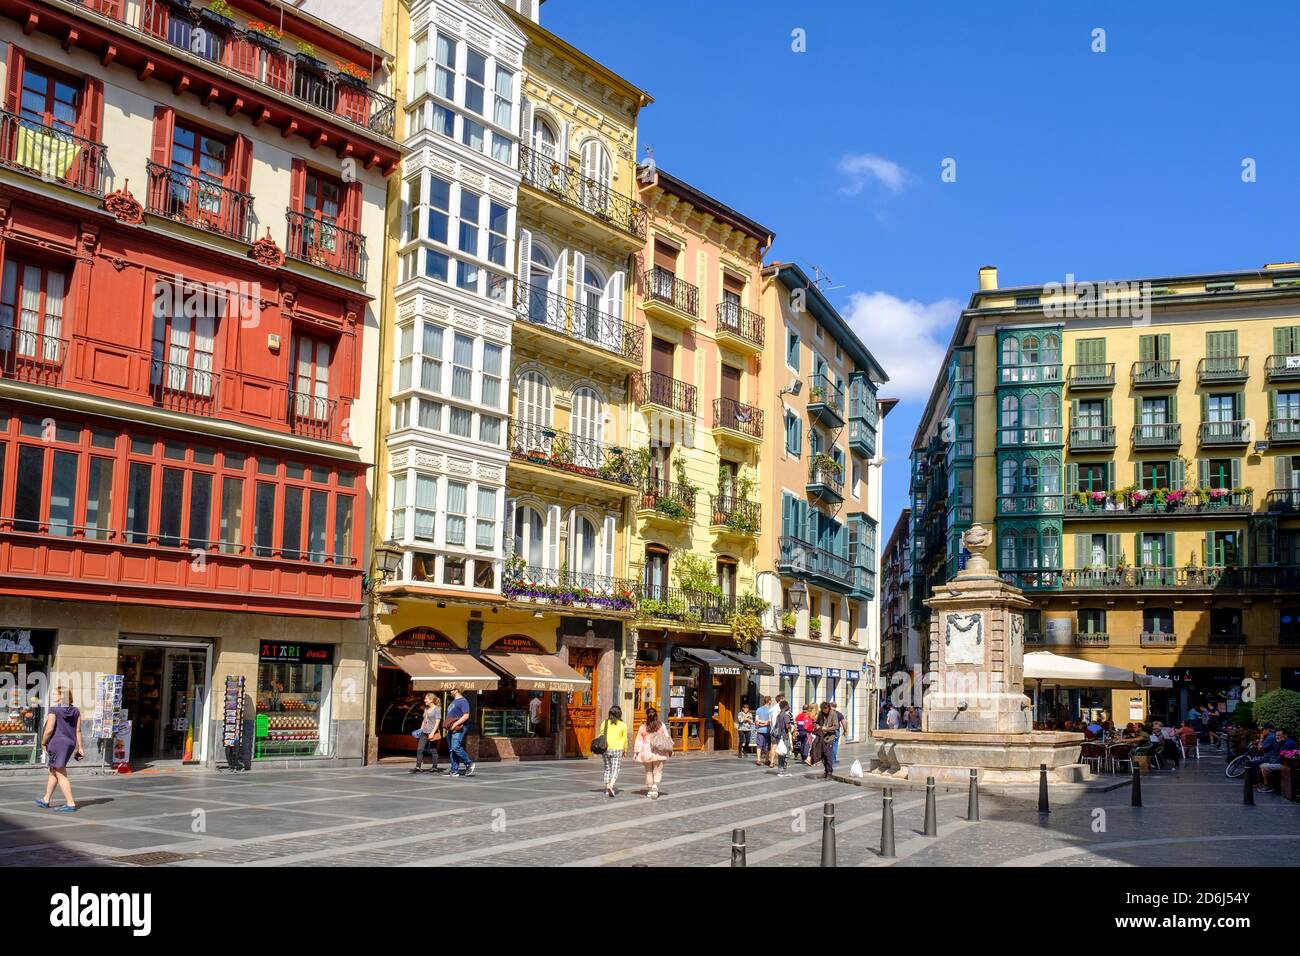 Plaza Done Jakue Plazatxoa, at the Cathedral, Bilbao, Basque Country, Spain Stock Photo